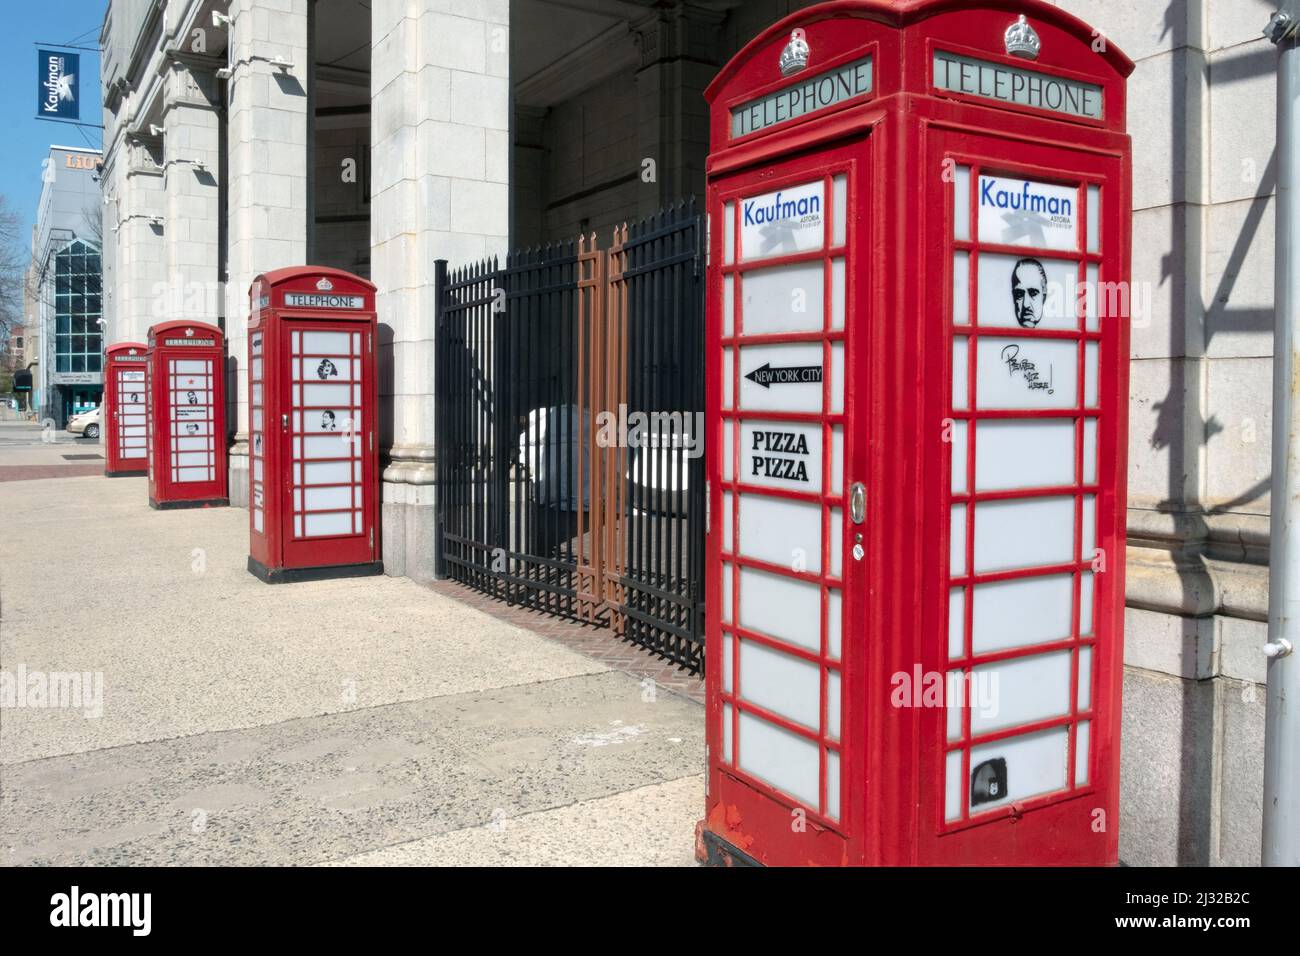 Decorative British style phone booth on display on 35th Avenue in Astoria, Queens, near the Kaufman Studios entrance. New York City. Stock Photo